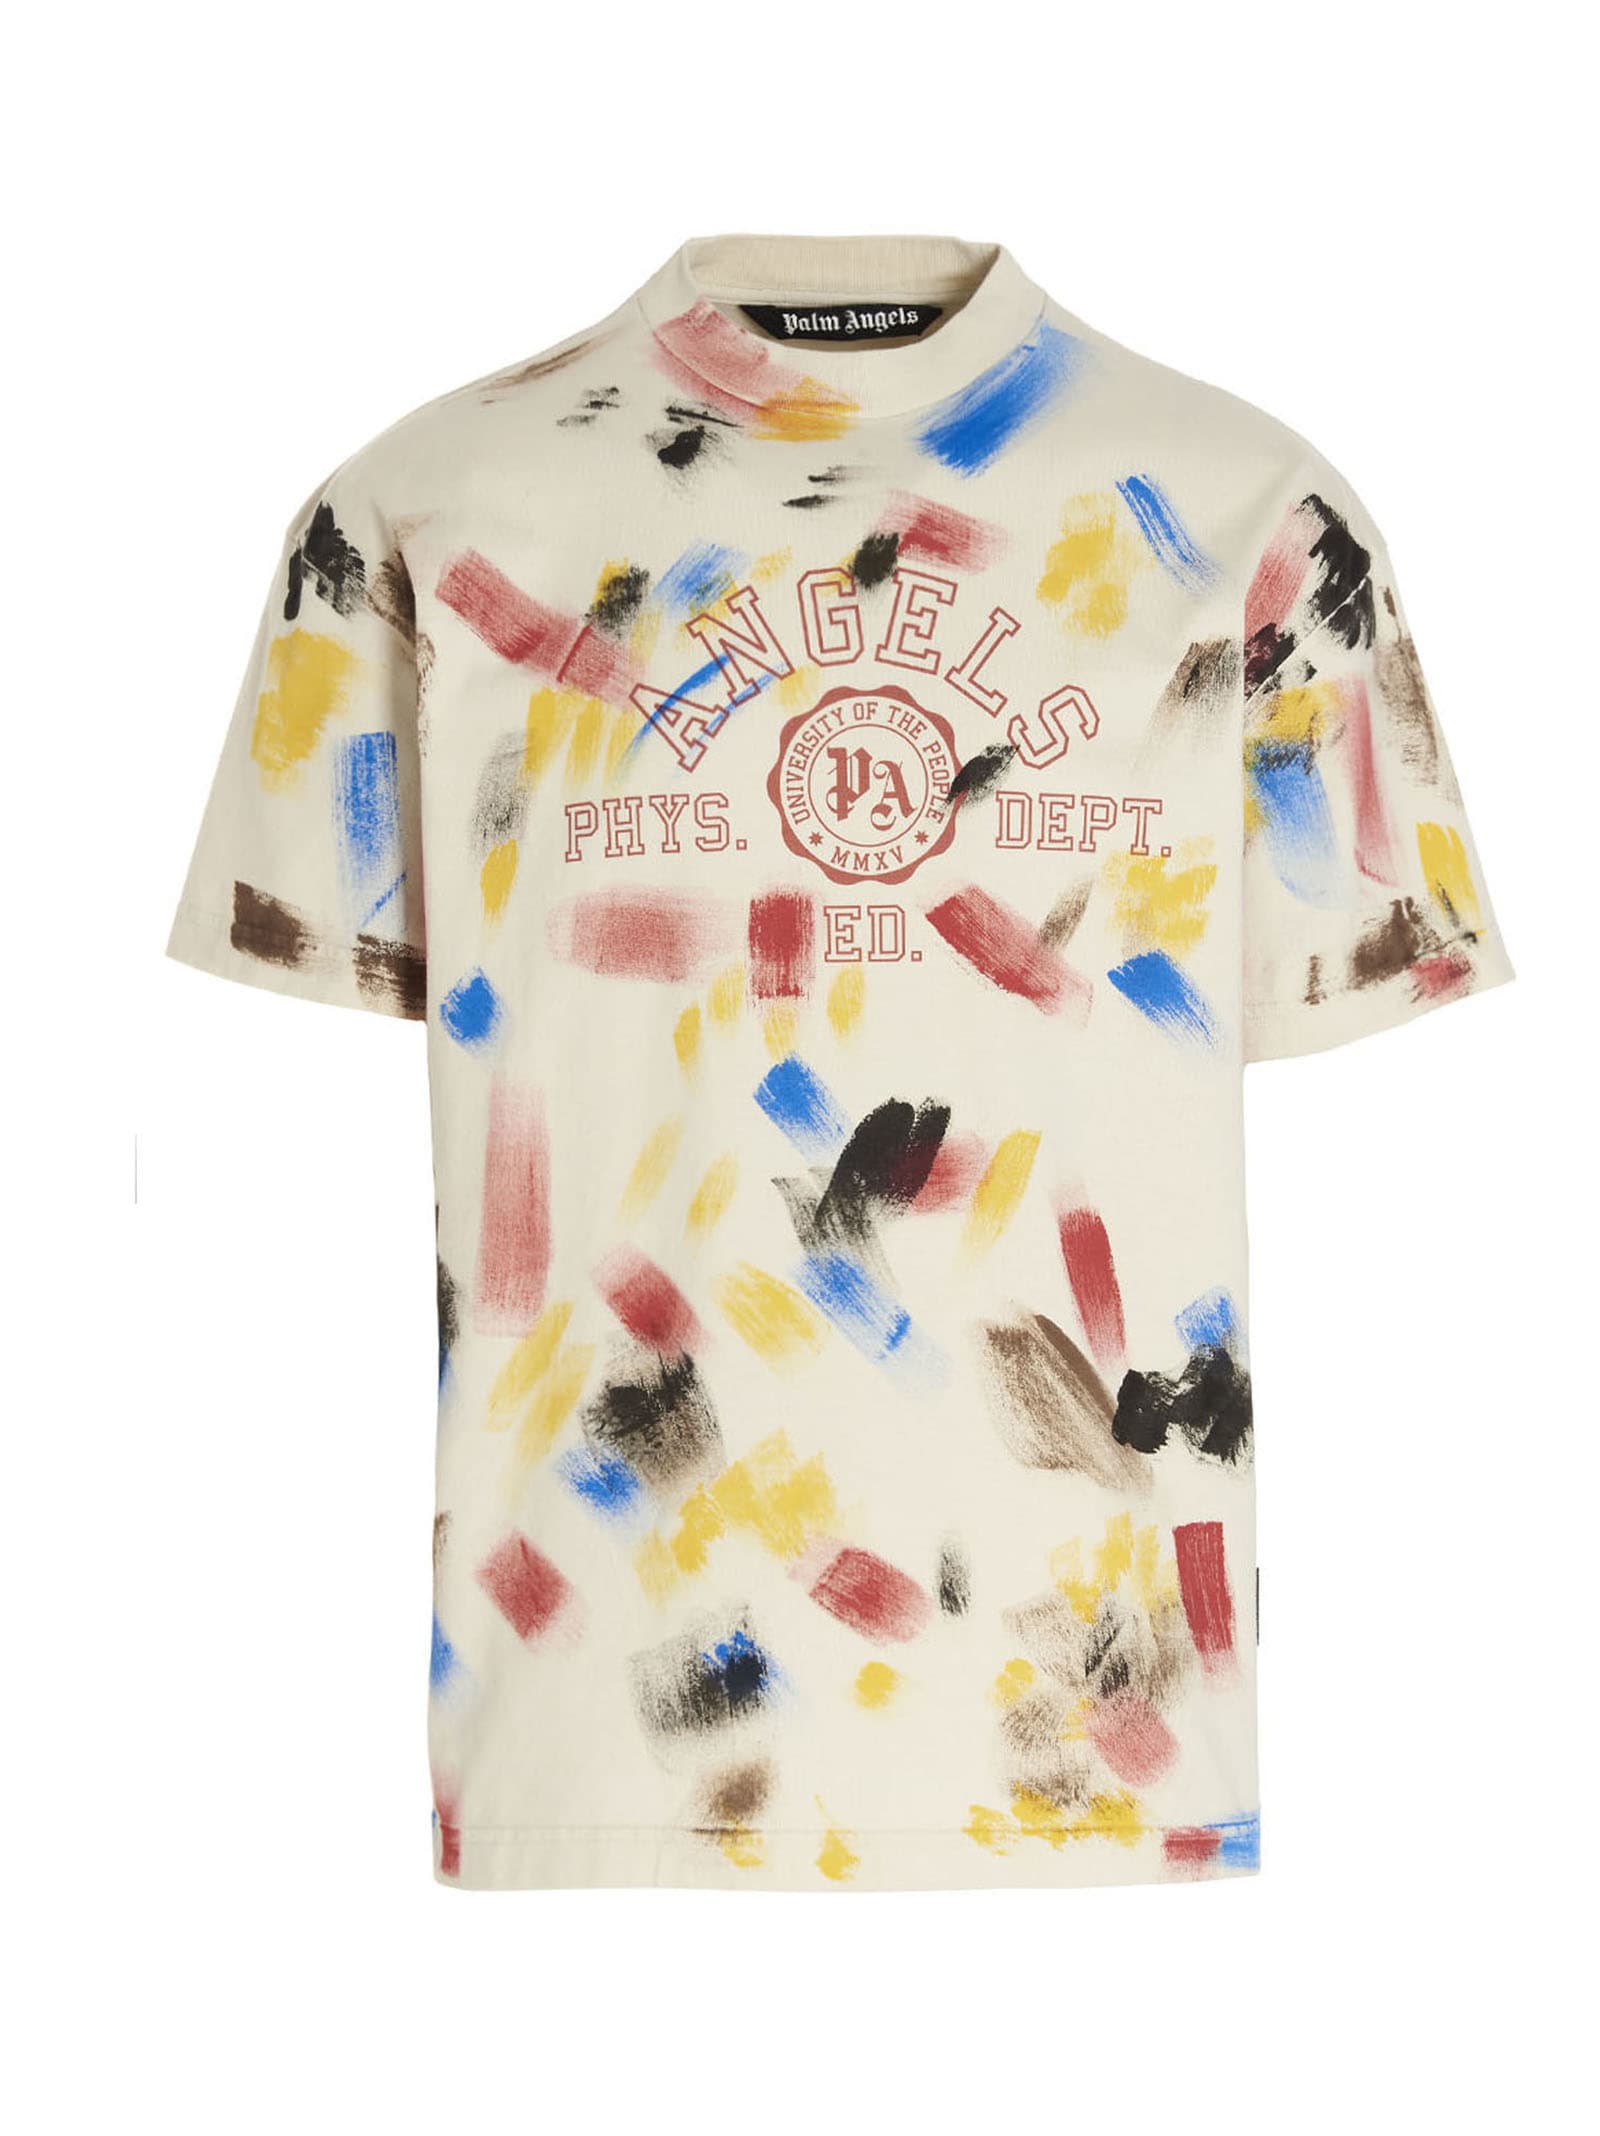 Palm Angels painted College T-shirt